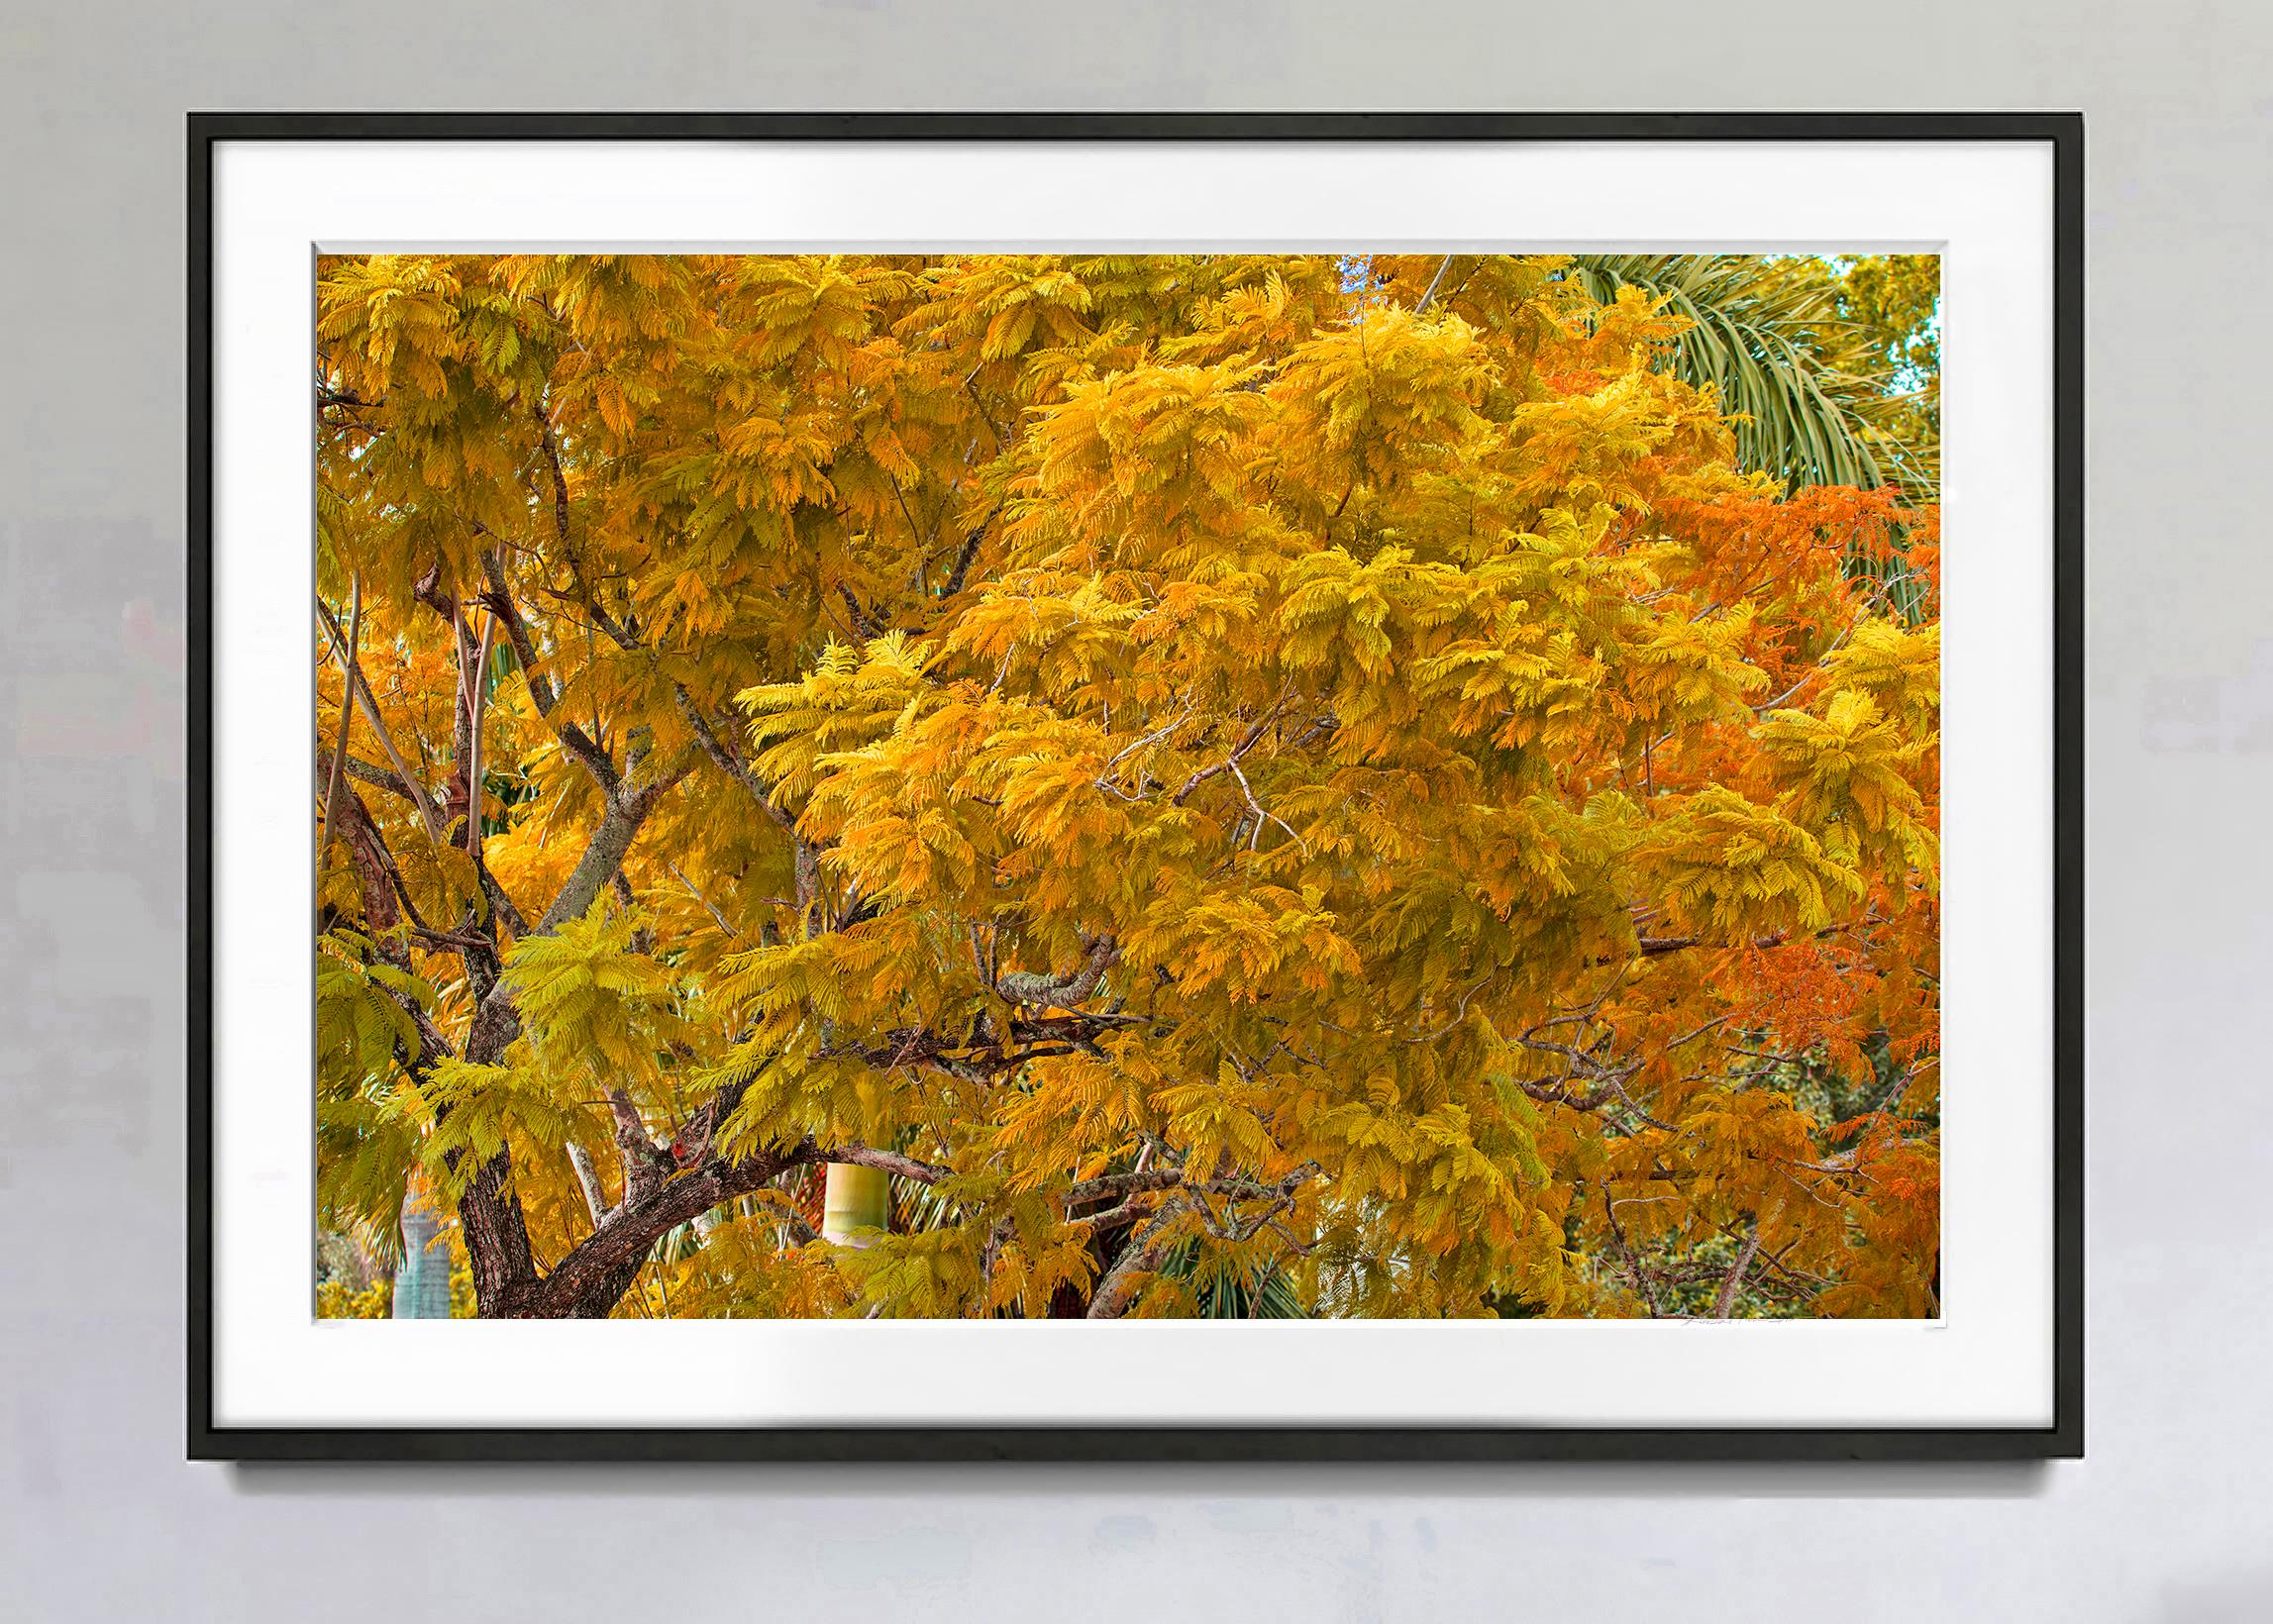 Autumn Color. Fall Foliage, Trees in  Shades of Muted  Yellow and  Orange - Photograph by Robert Funk